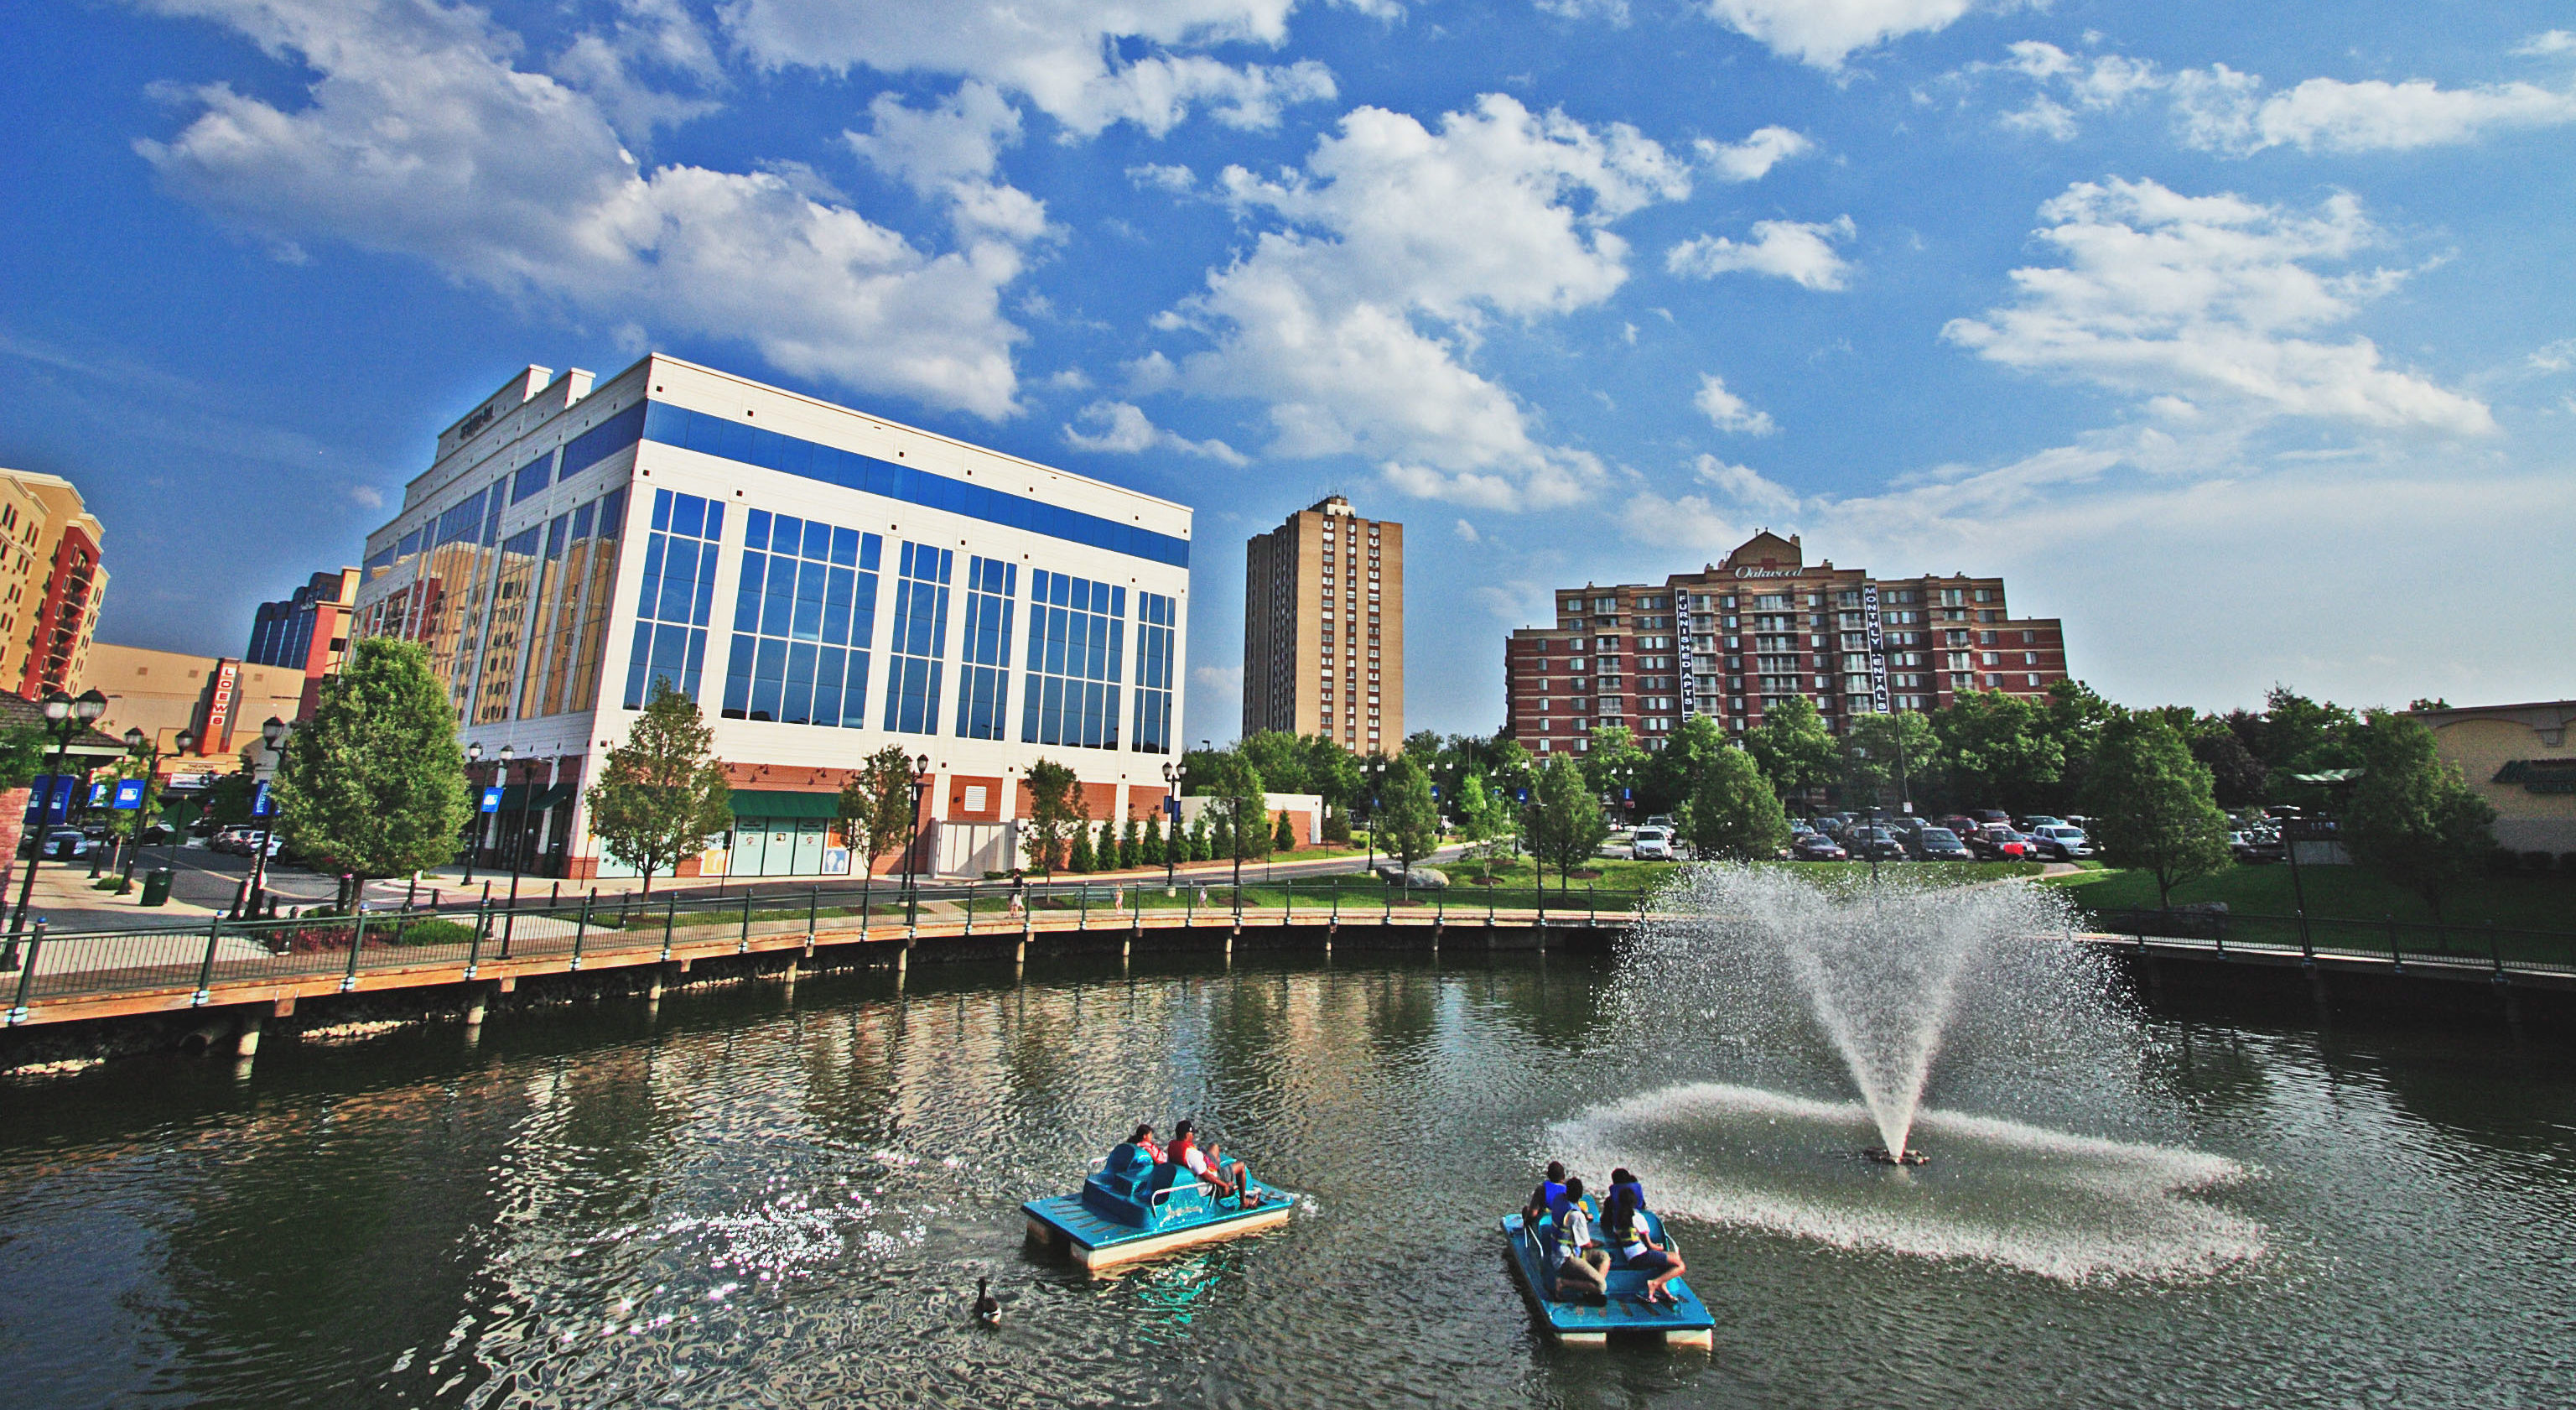 Why Bethesda MD Is a Best Place to Live - Livability